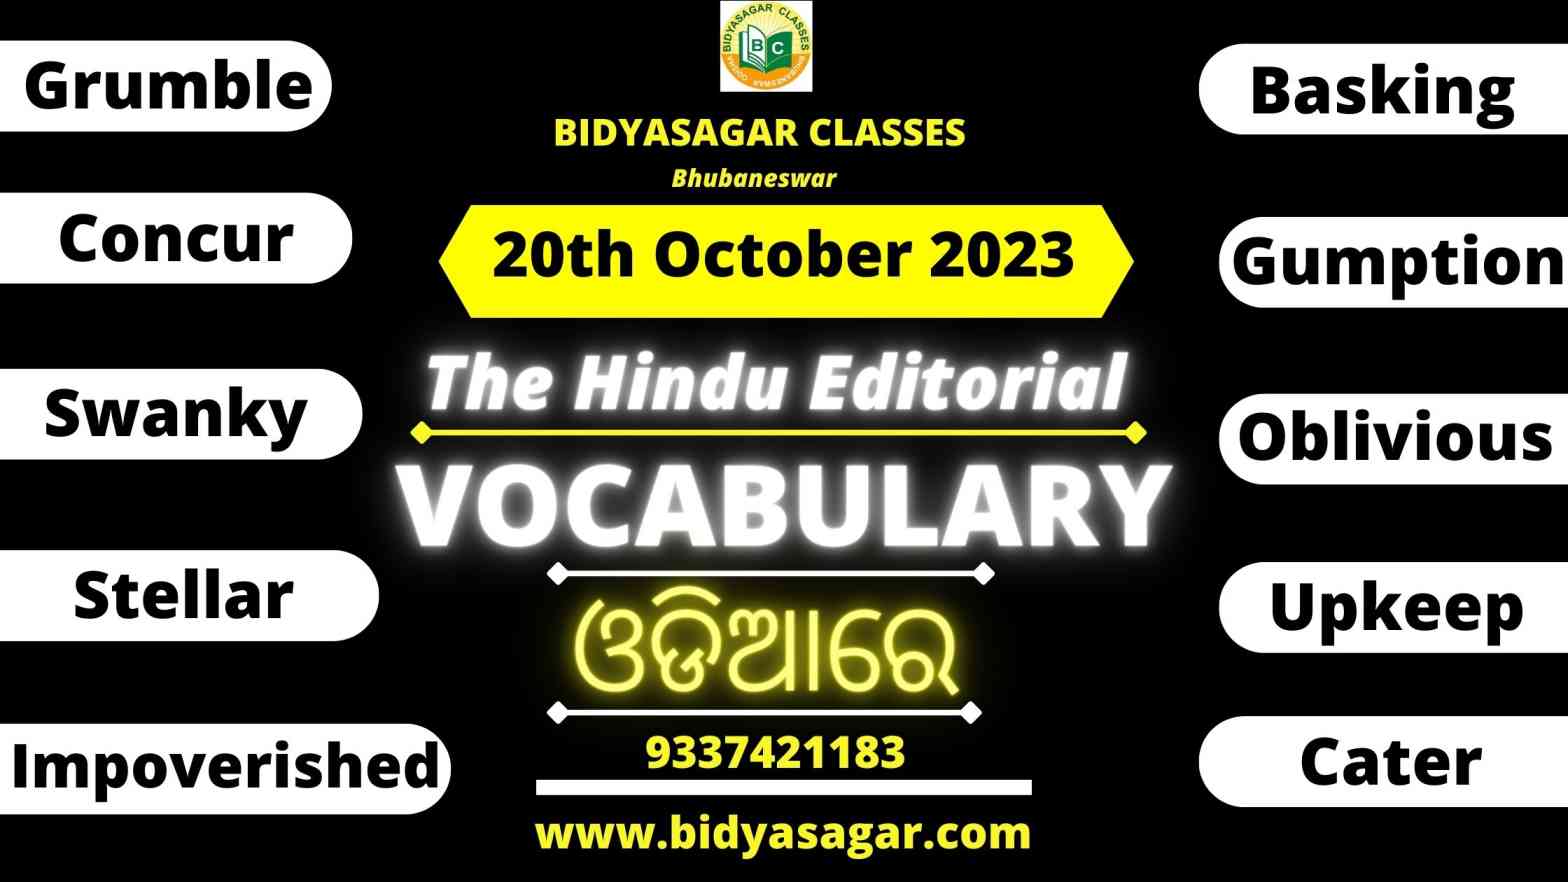 The Hindu Editorial Vocabulary of 20th October 2023